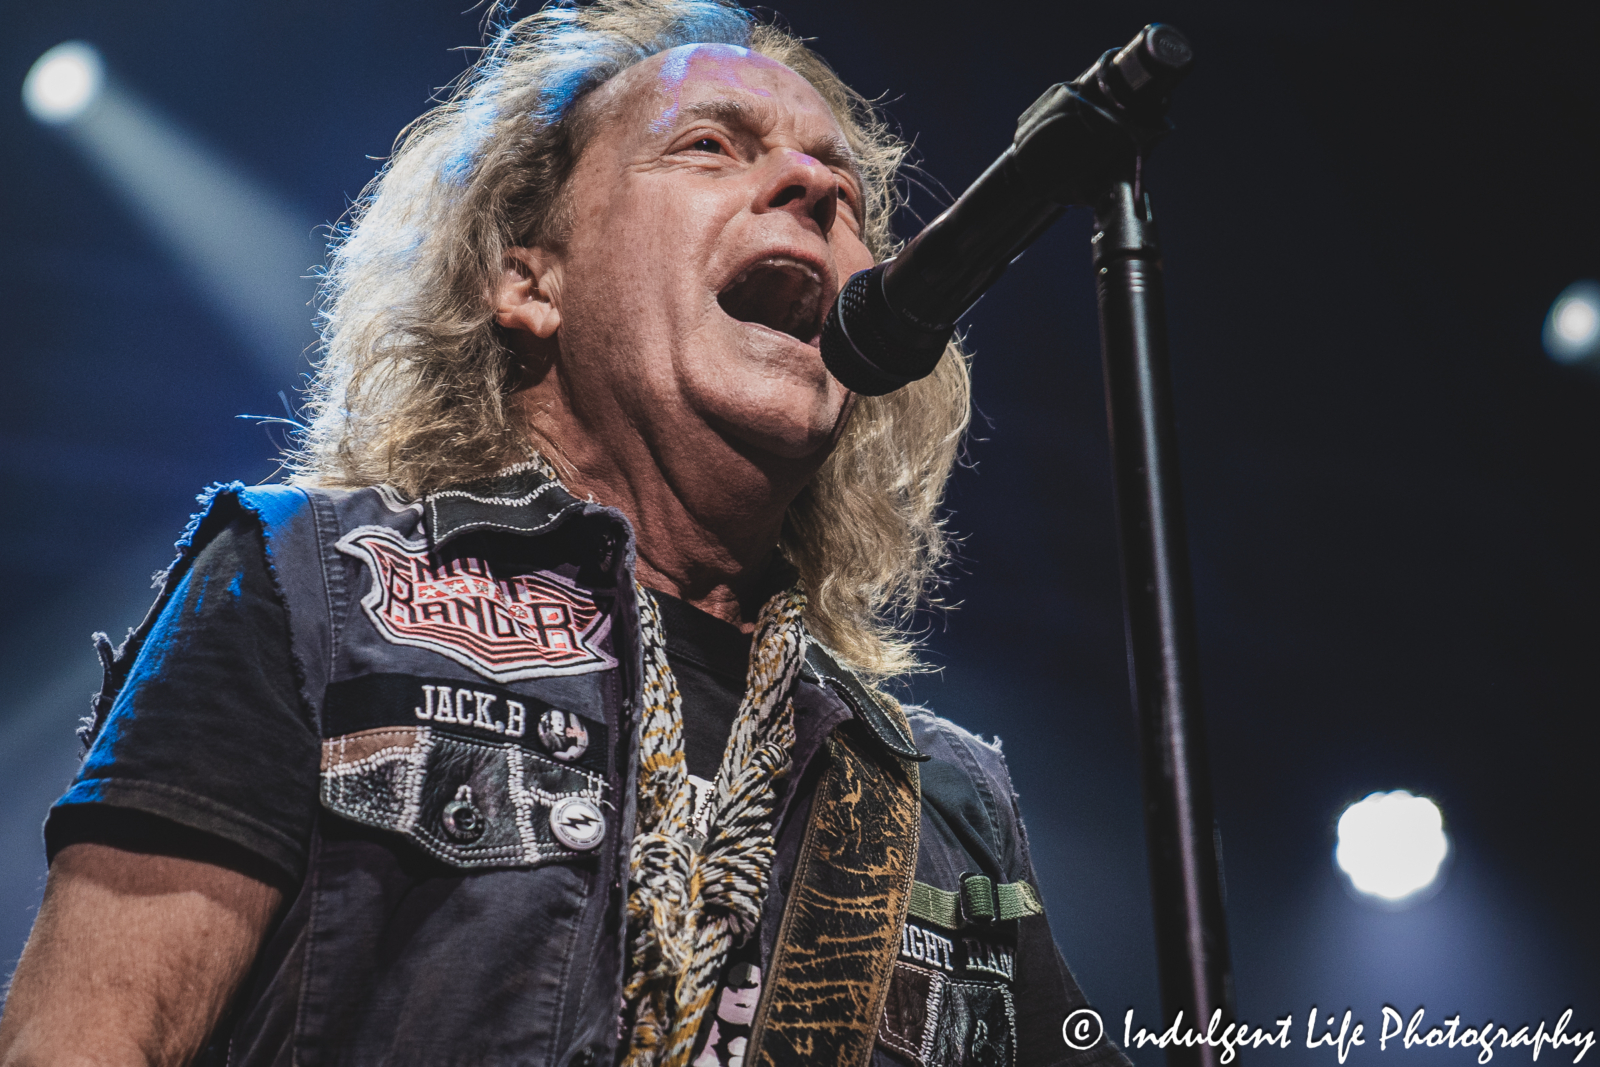 Lead singer and bass guitarist Jack Blades of Night Ranger performing live at Ameristar Casino's Star Pavilion in Kansas City, MO on October 20, 2023.